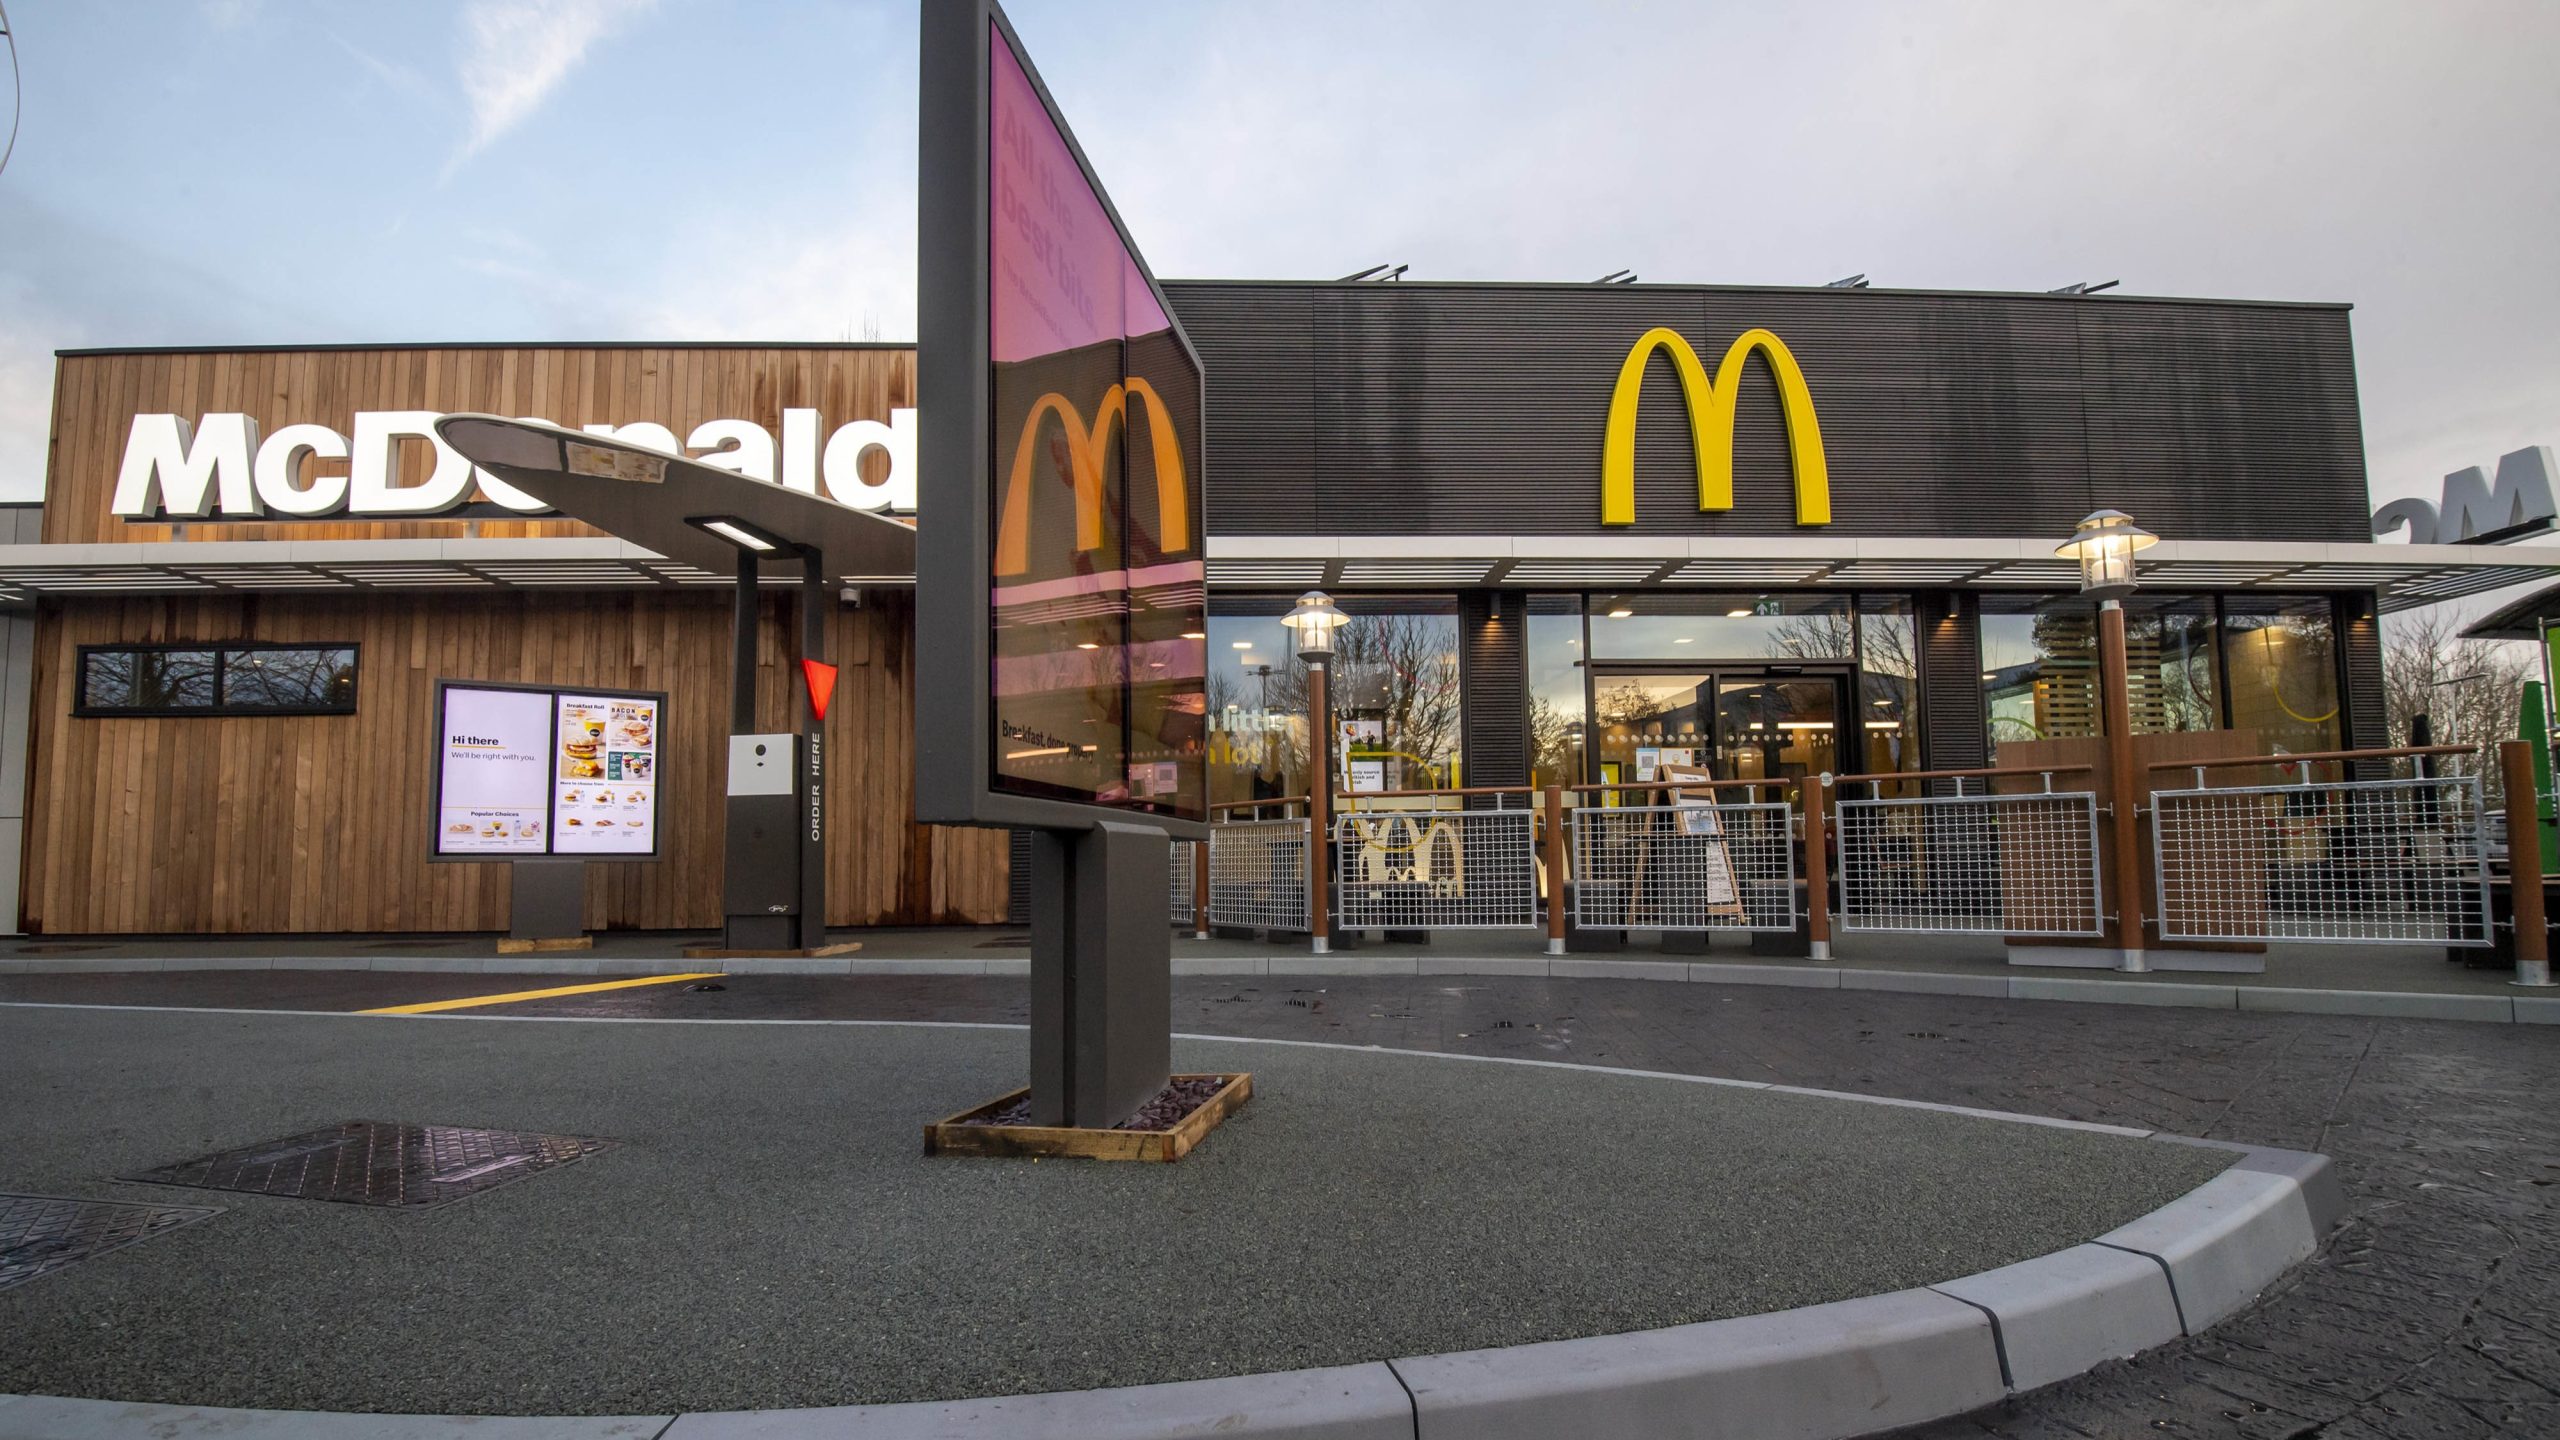 McDonald's ordered to close franchises due to abuse allegations